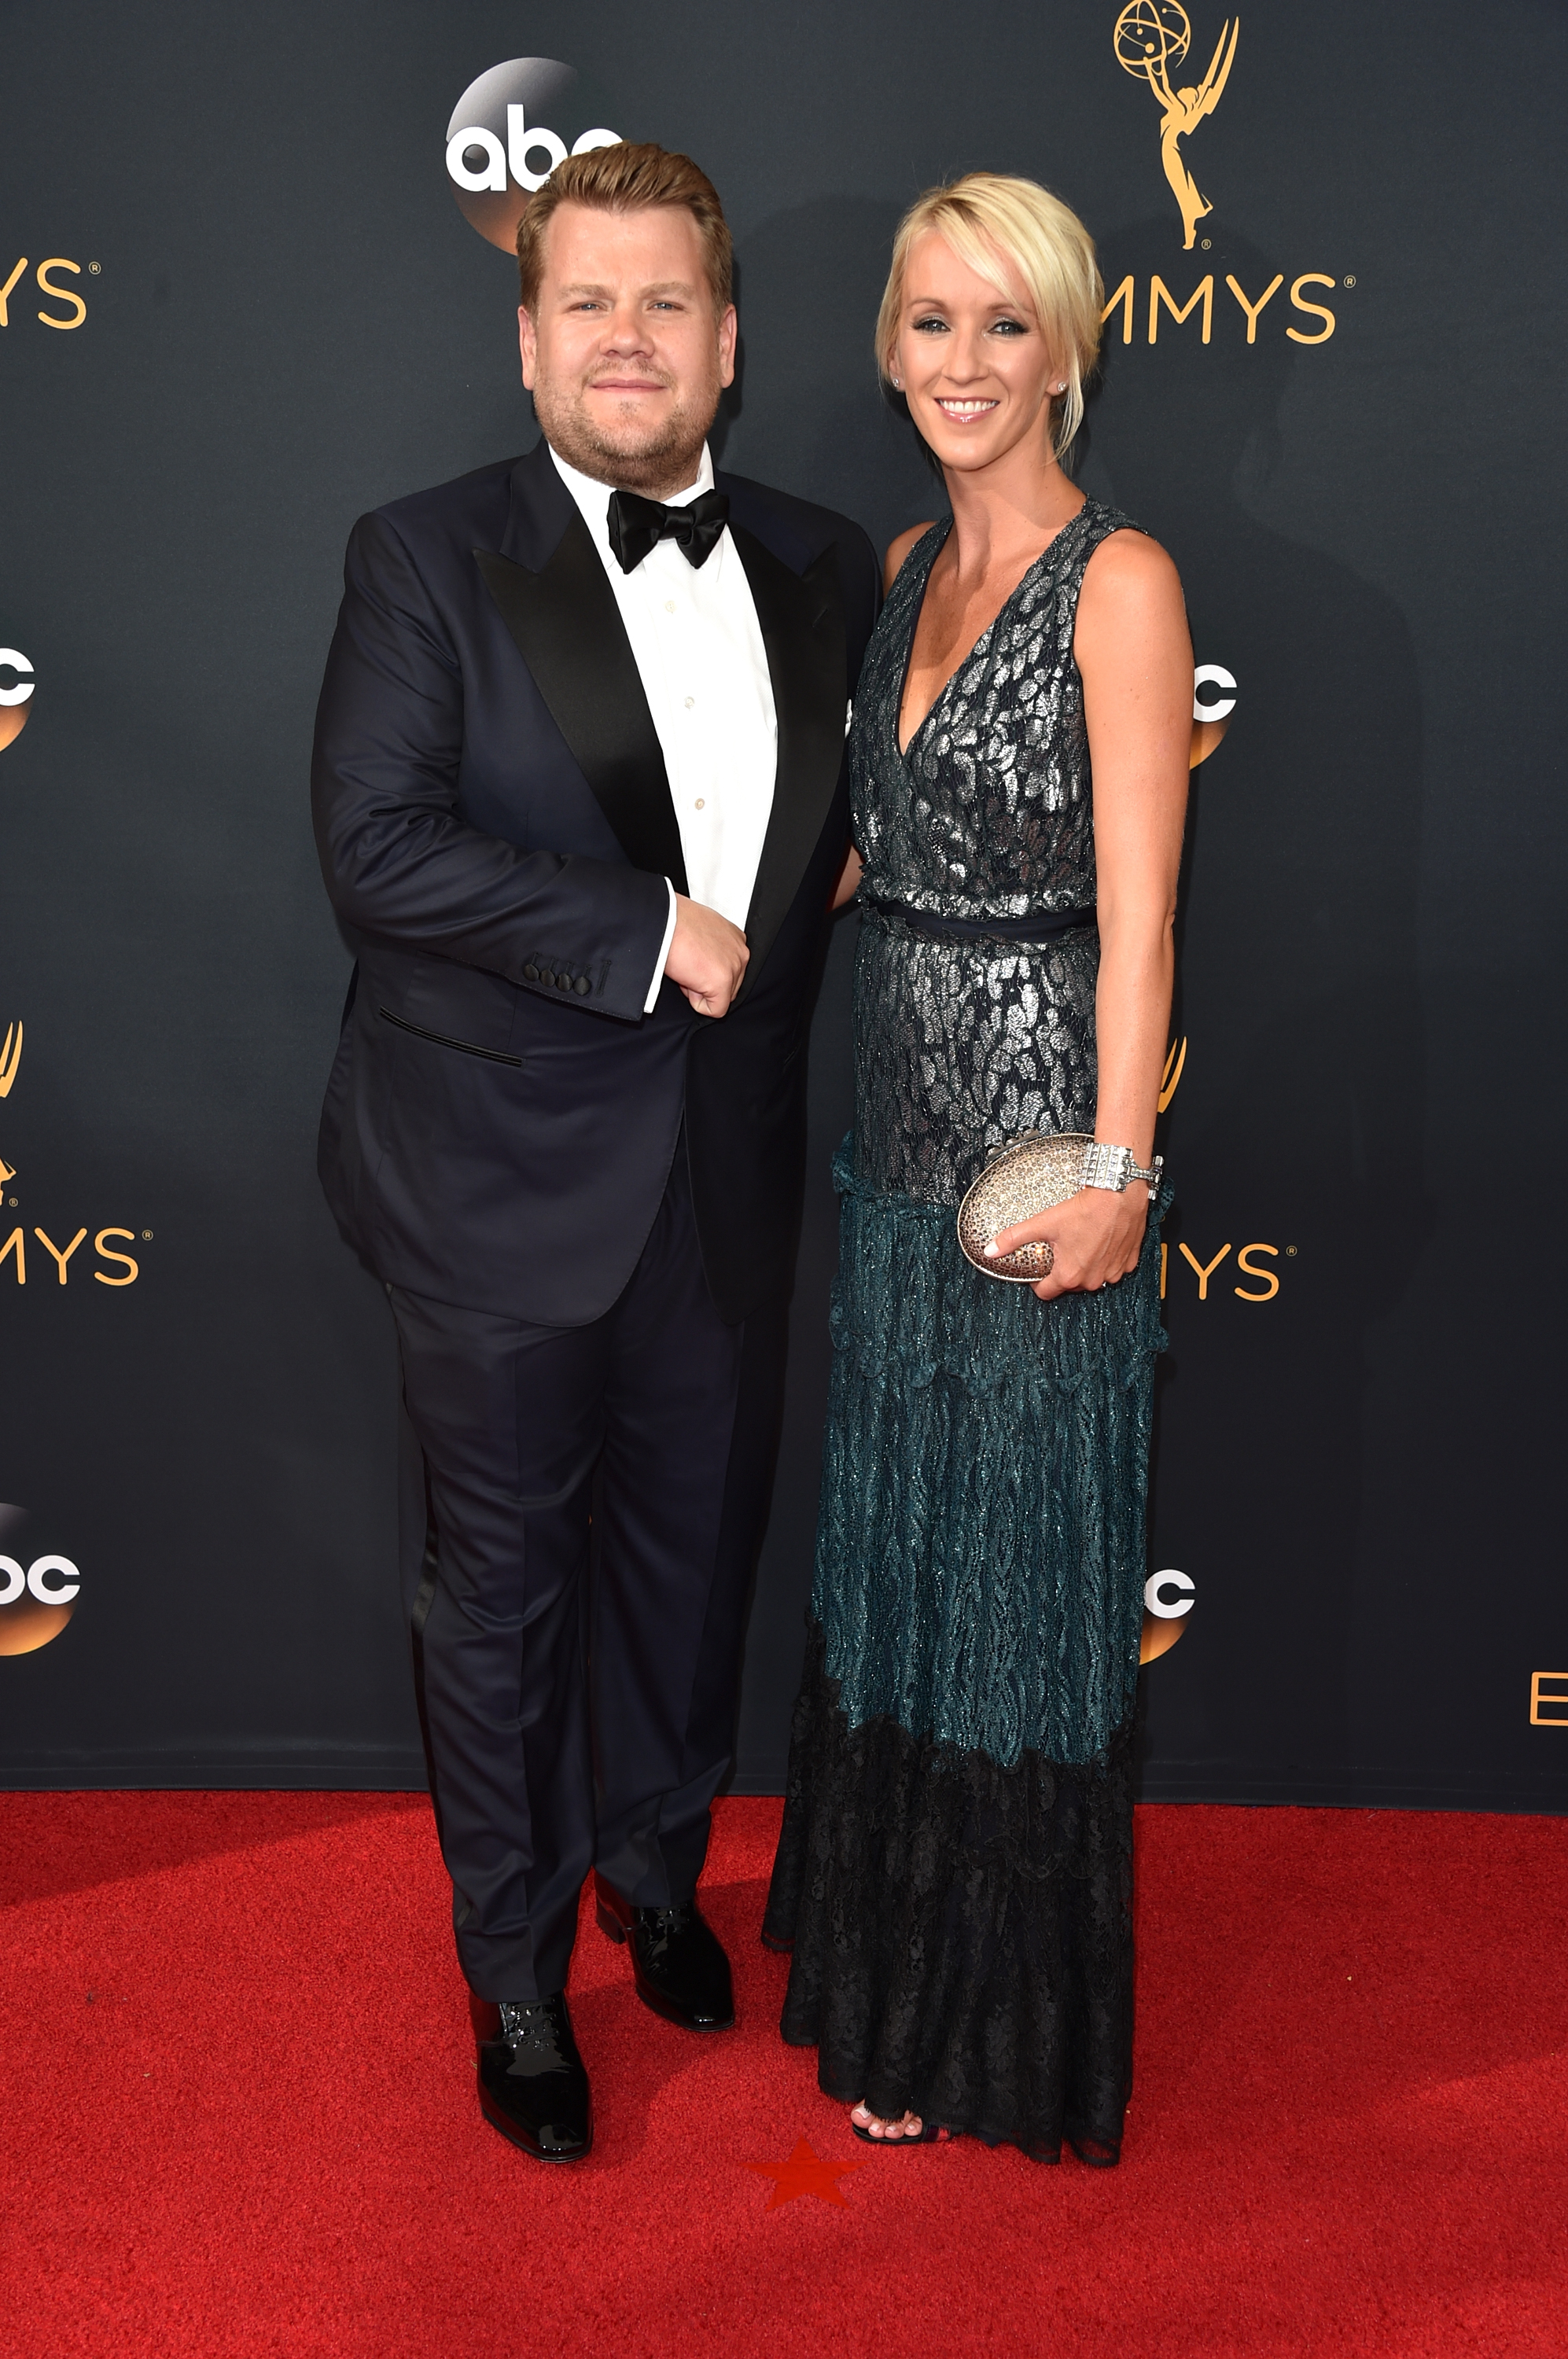 James Corden and Julia Carey arrive at the 68th Annual Primetime Emmy Awards at Microsoft Theater on September 18, 2016 in Los Angeles.